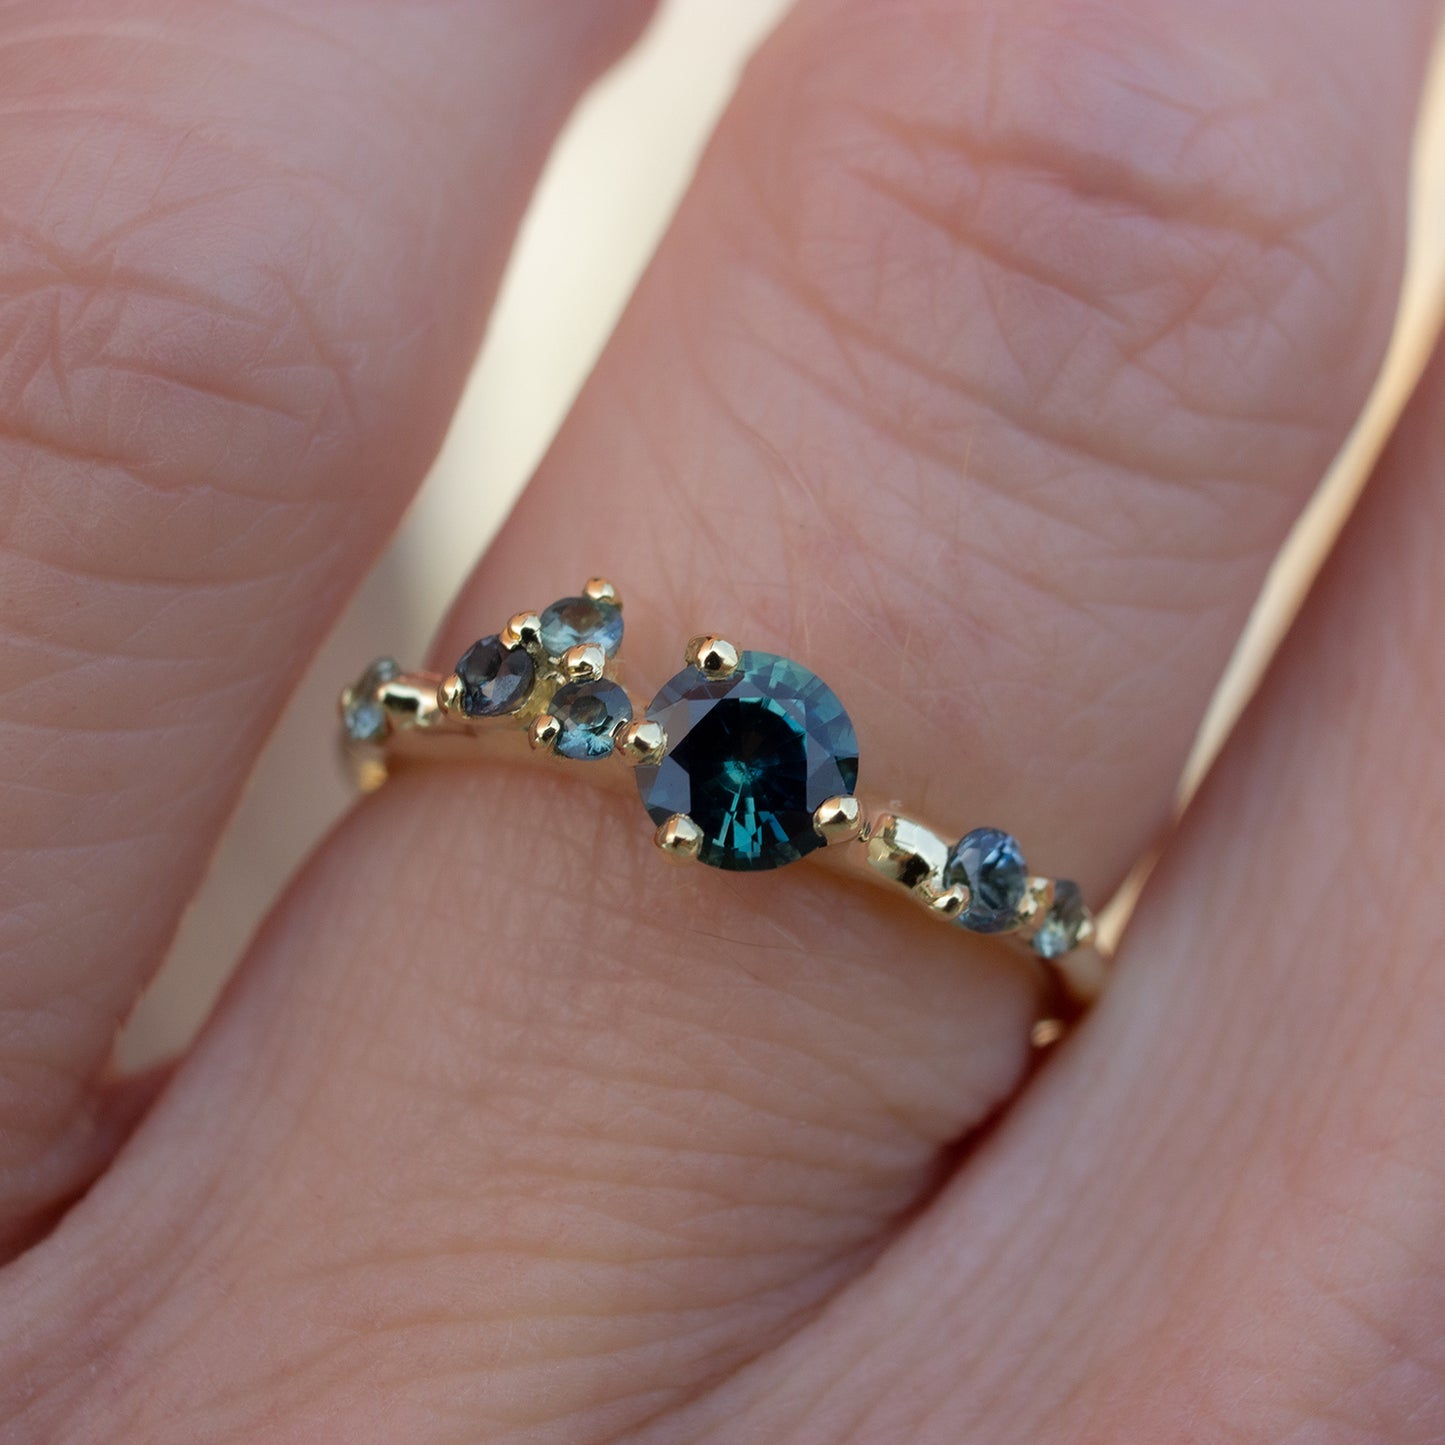 Asymmetrical, delicate ring featuring beautiful teal sapphires scattered along a gold band.